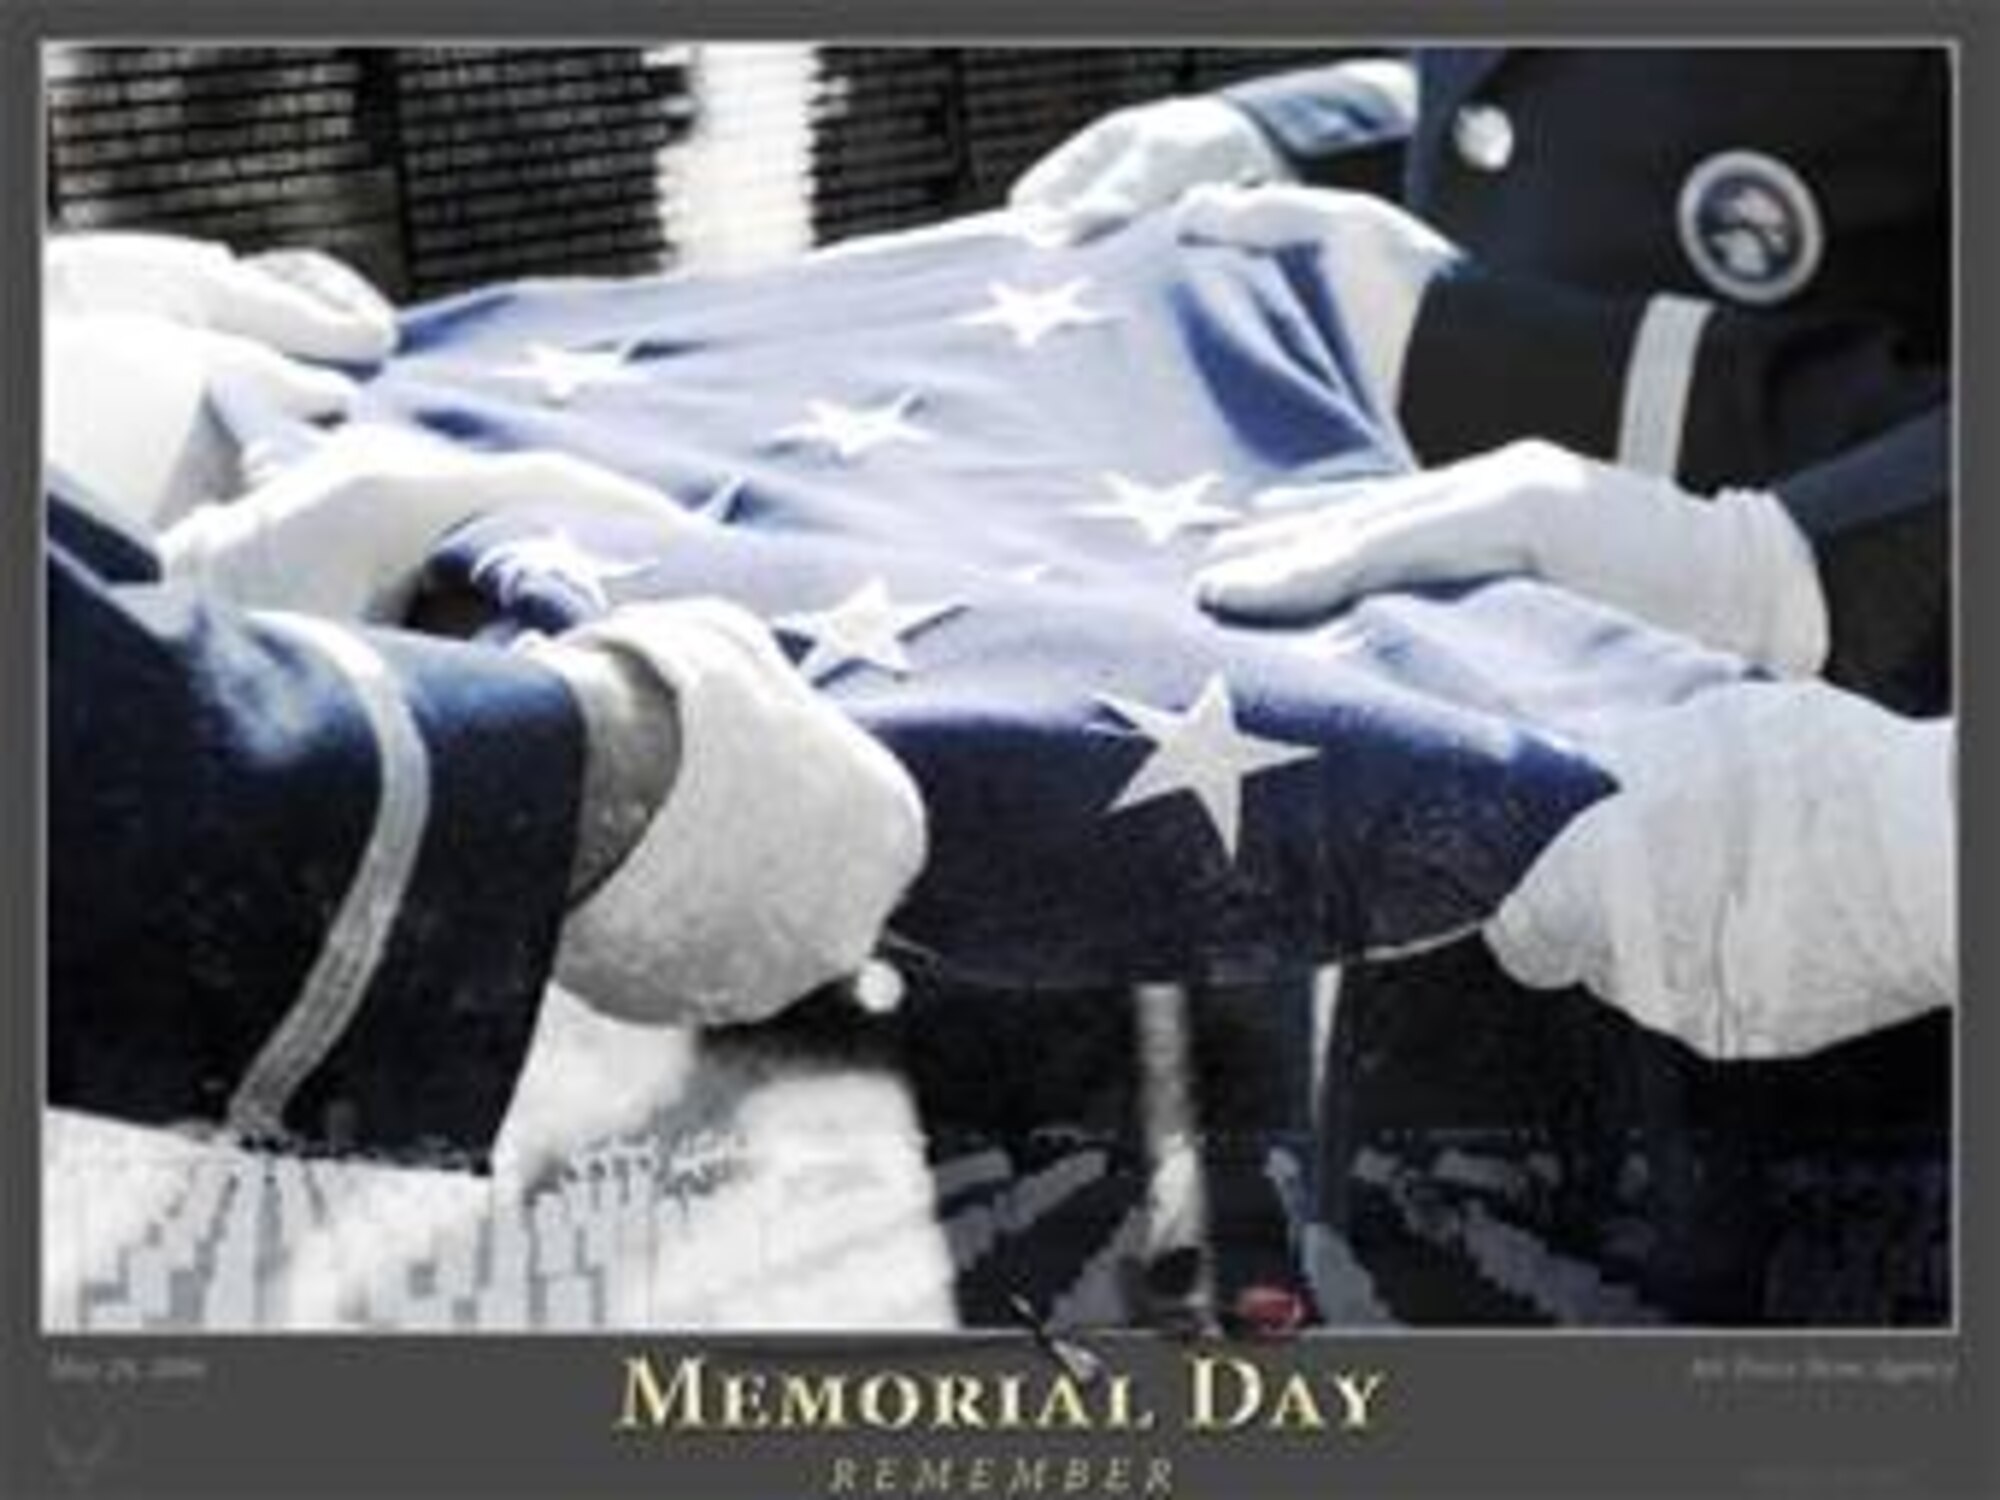 Memorial Day Wallpaper #2, 1024x768. Created by Patrick Harris of the Air Force News Agency. INSTRUCTIONS FOR USING WALLPAPER: Getting Started: The wallpaper should first be downloaded to a folder on your computer. You can either create a new folder or place the image in an existing folder. Windows XP Users: Select Start, open Control Panel and select the Display icon to open the Display Properties panel. From the tabs across the top select Desktop and scroll through the Background selection box, to select Browse. Navigate to the folder where you stored the wallpaper. Select and Apply the wallpaper and close the Display Properties window. MAC OSX Users: Open System Preferences from the Drop down Apple icon. Select the Desktop & Screen Saver icon. Select Desktop from the box at the upper center of the page. Then select Choose Folder in the scroll down box. Navigate to the folder where you stored the wallpaper. Once you have selected the wallpaper Apply it and then close the Desktop & Screensaver window.